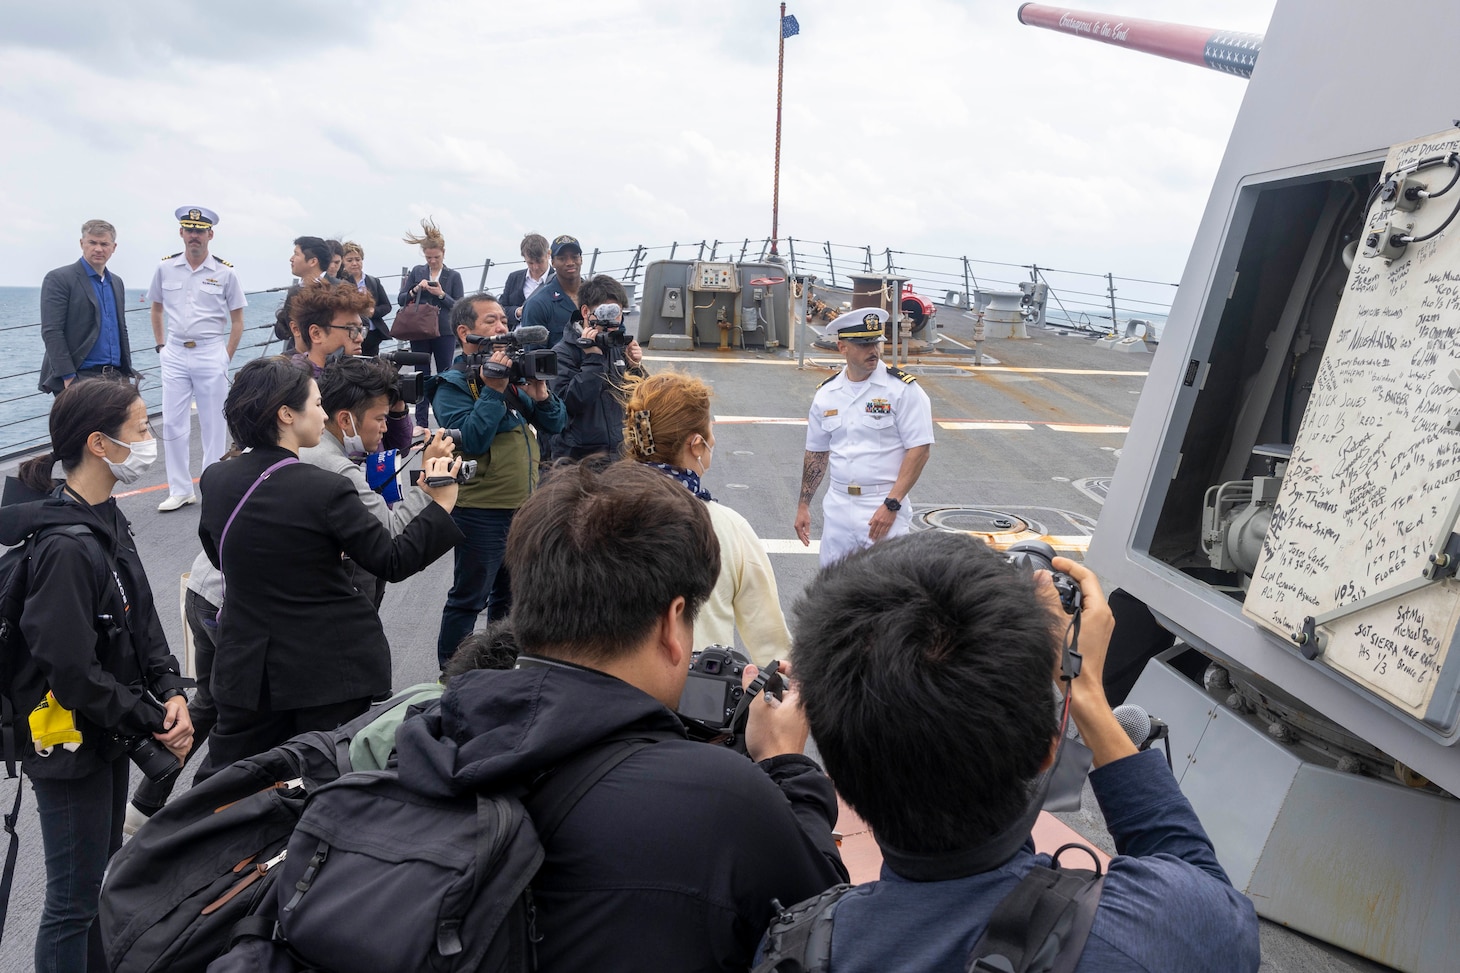 ISHIGAKI, Japan (Mar. 11, 2024) Lt. Chris Lelah, plans and tactics officer aboard the Arleigh Burke-class guided-missile destroyer USS Rafael Peralta (DDG 115), gives local media a tour of Rafael Peralta (DDG 115) in Ishigaki, Japan during a regularly scheduled port visit. Rafael Peralta is the first United States destroyer to visit Ishigaki. Rafael Peralta is forward-deployed and assigned to Destroyer Squadron (DESRON) 15, the Navy’s largest DESRON and the U.S. 7th Fleet’s principal surface force. (U.S. Navy photo by Mass Communication Specialist 1st Class Devin Monroe)